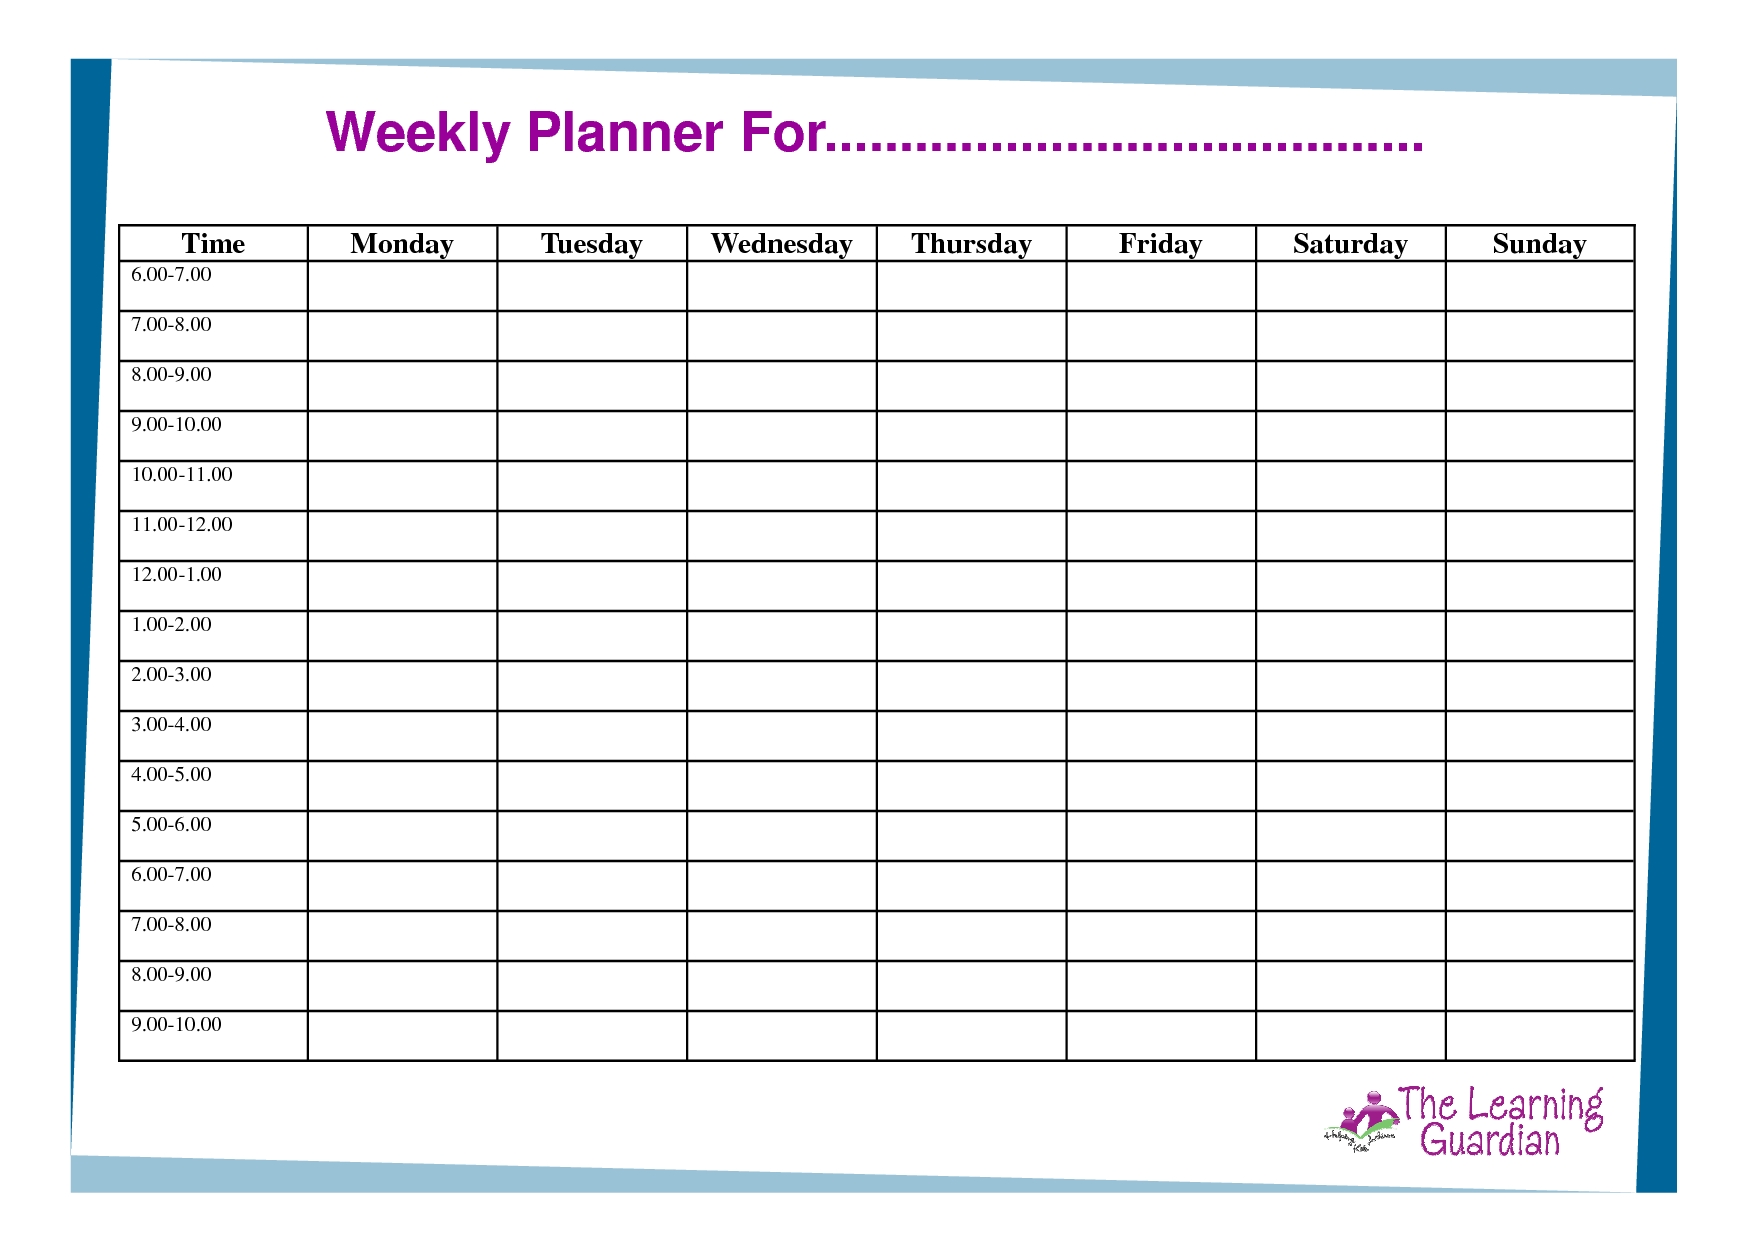 Weekly Calendar With Times Template - Yeniscale.co  Weekly Calendar Template With Times